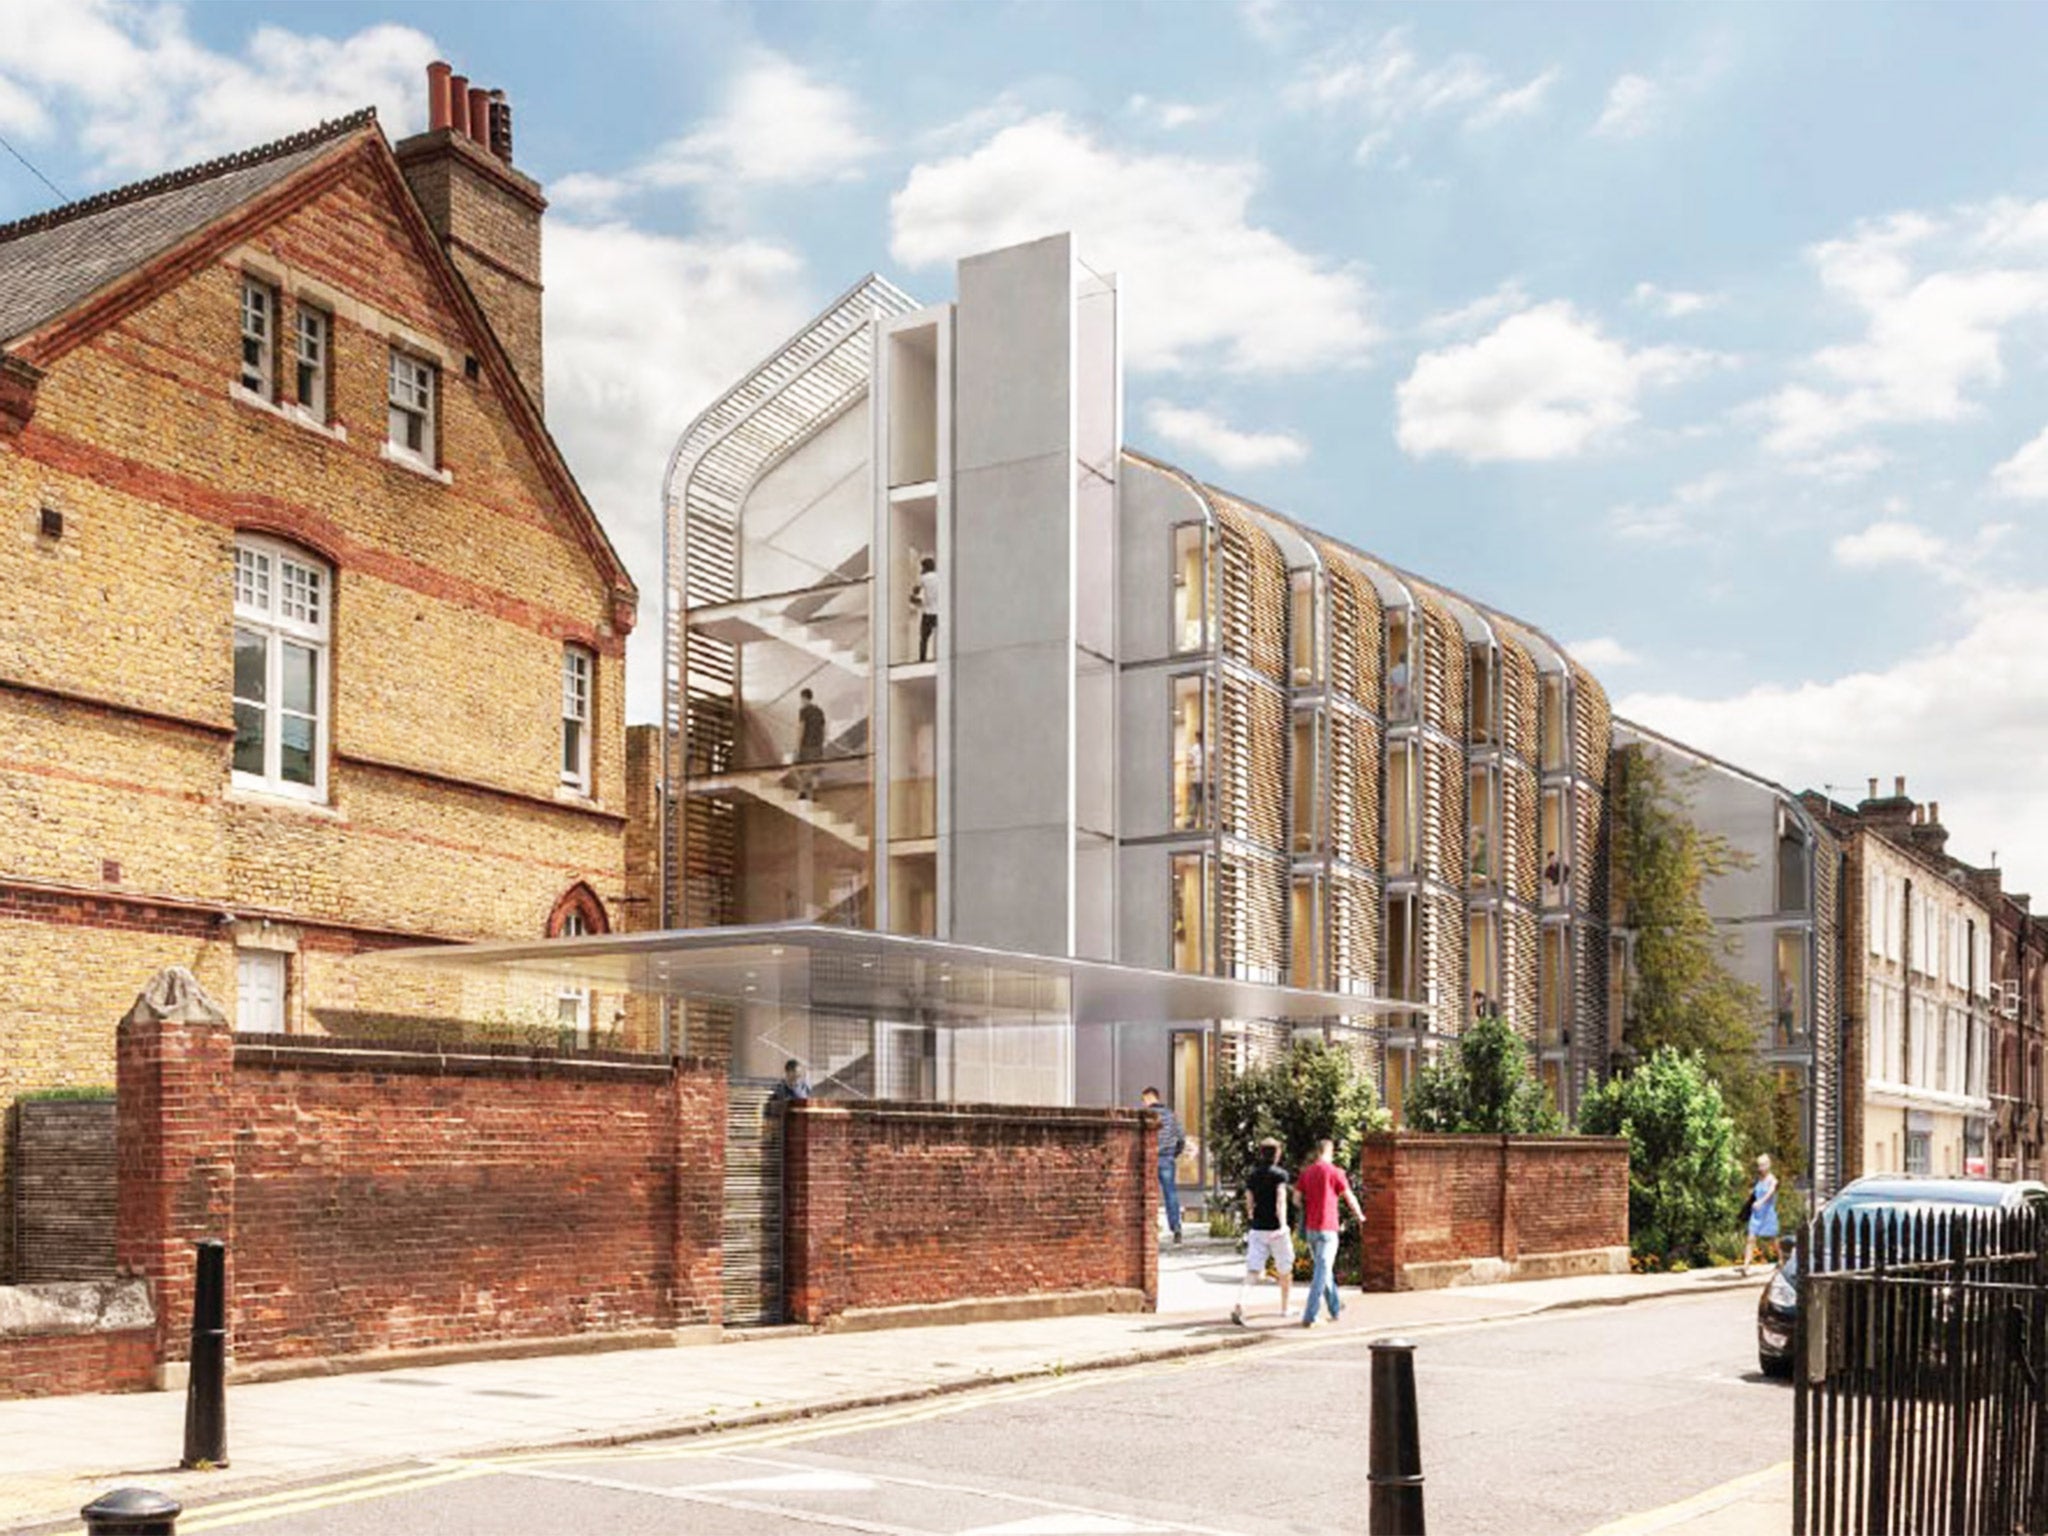 An illustration of how New Belvedere House will look when the redevelopment is finished